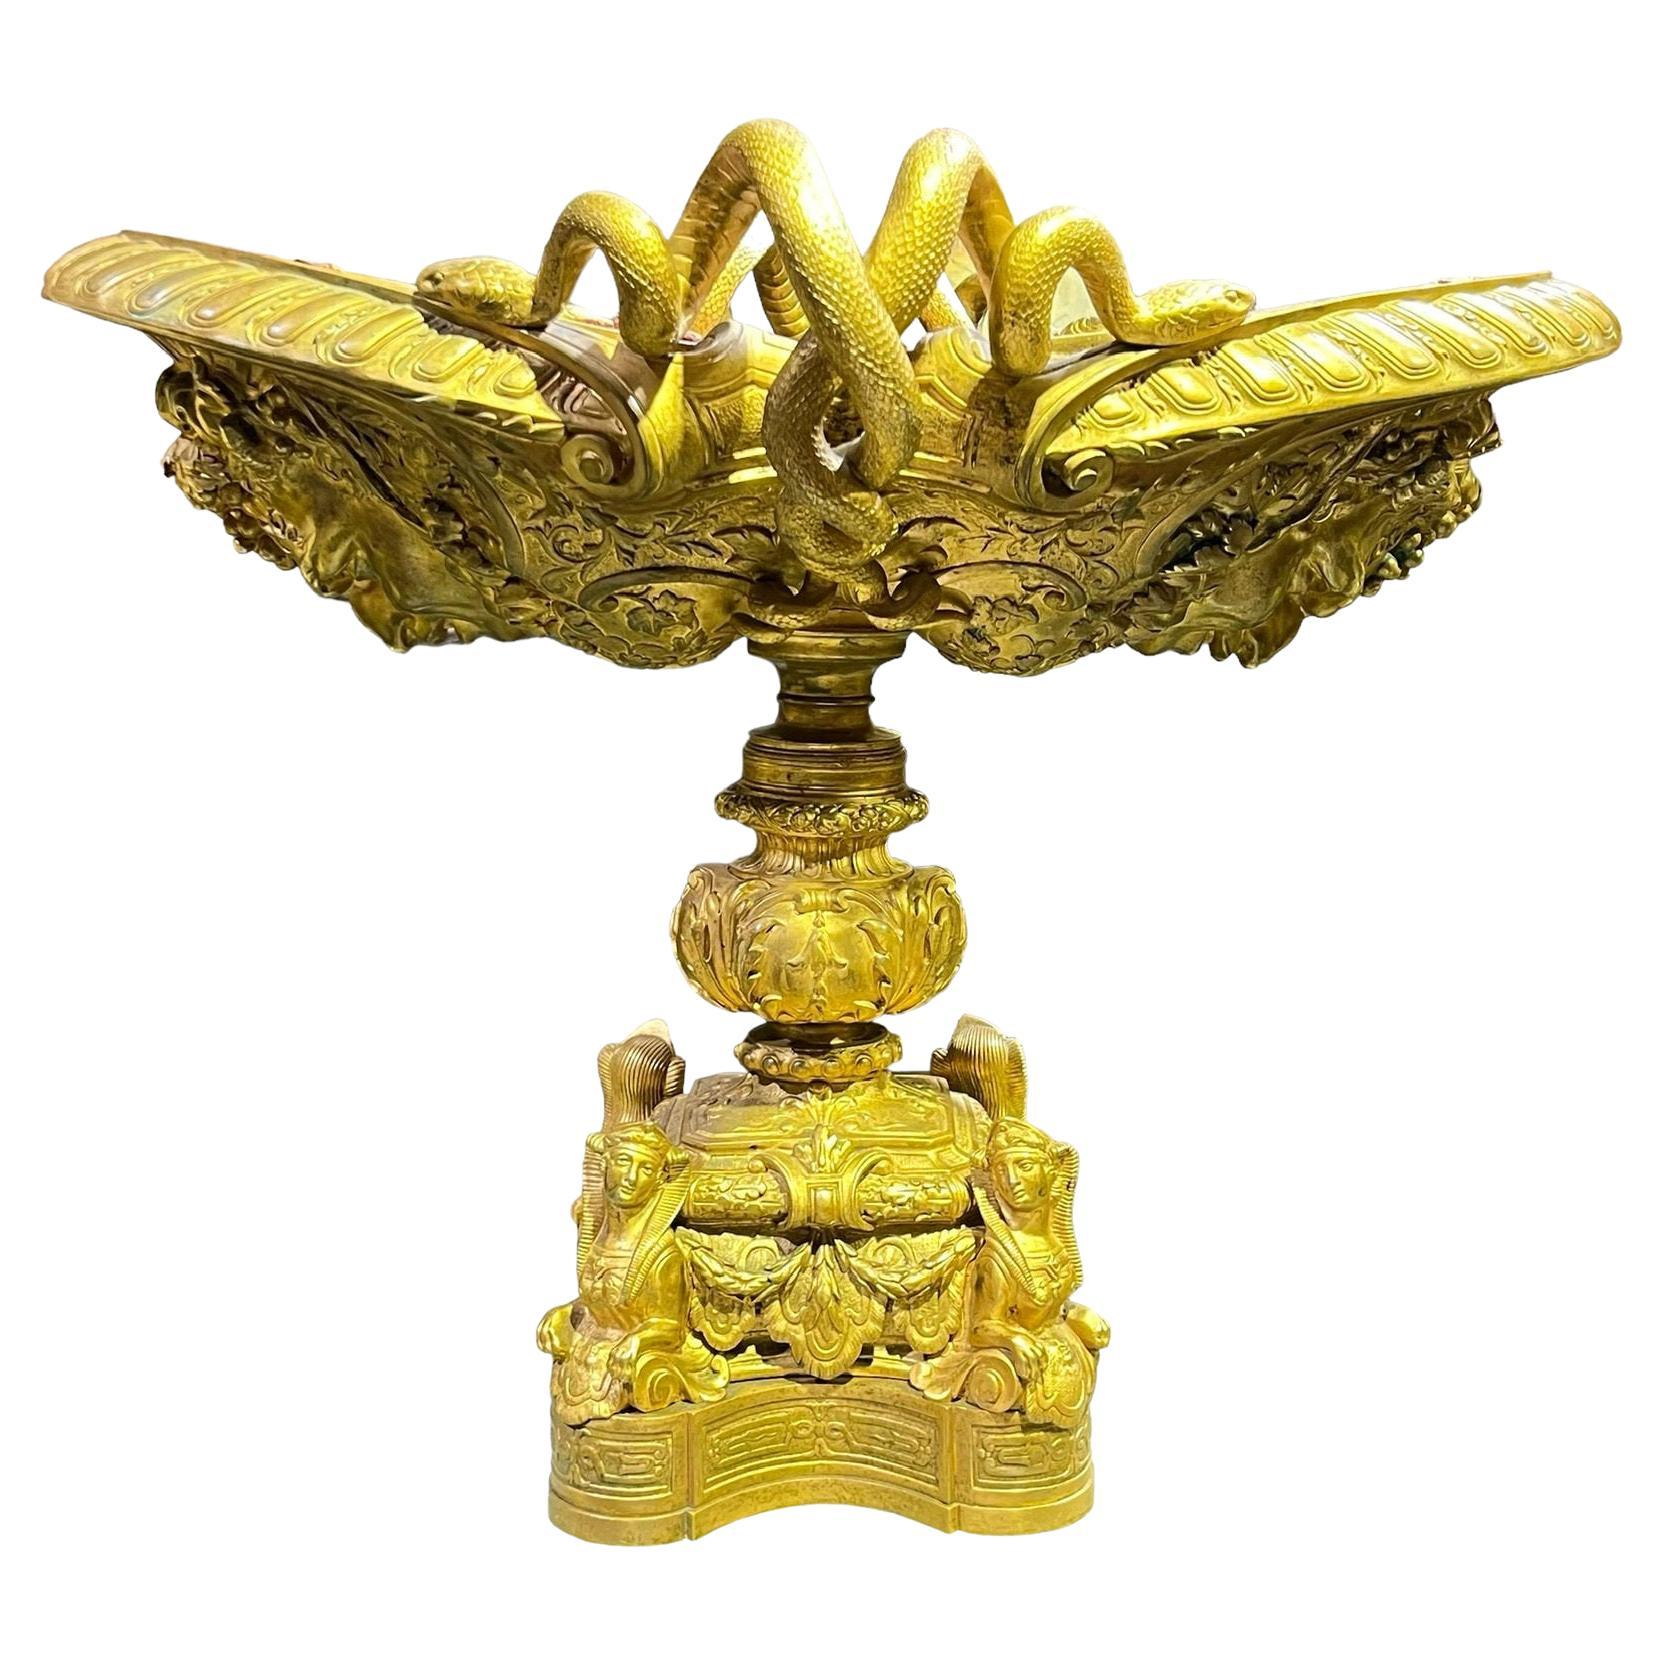 19th Century French Ormolu Bronze Jardiniere in French Empire Style